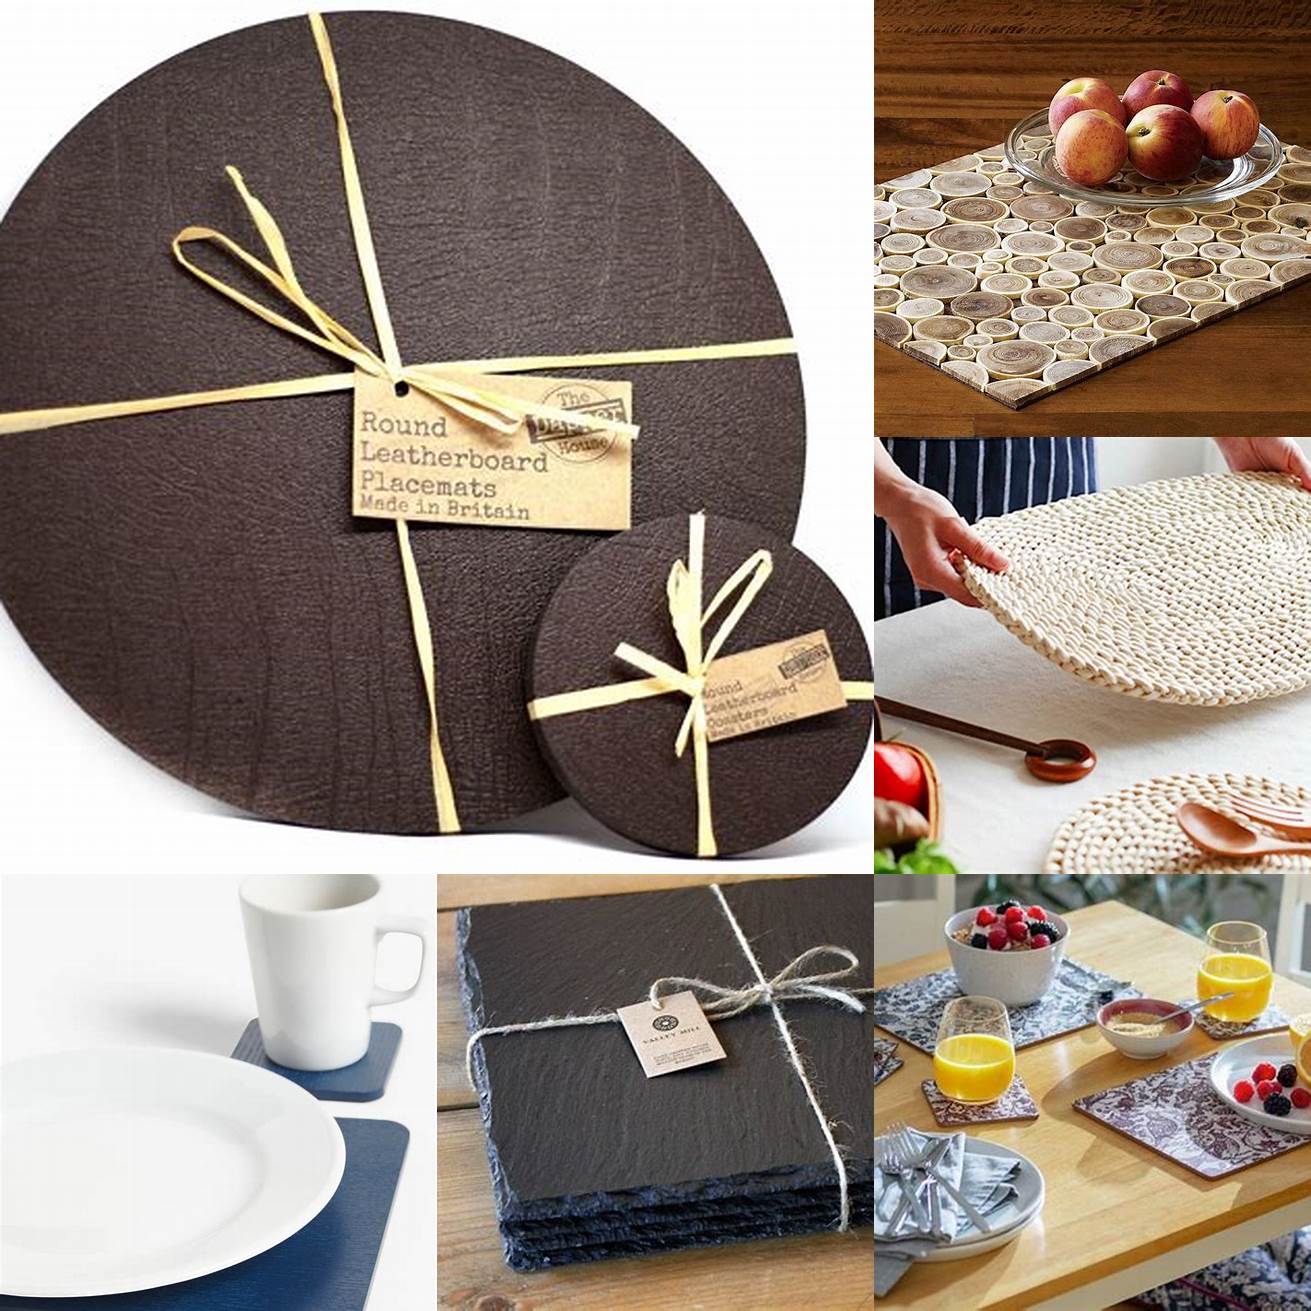 Protect your surfaces Use coasters and placemats to protect the surfaces of your rustic furniture from scratches and stains